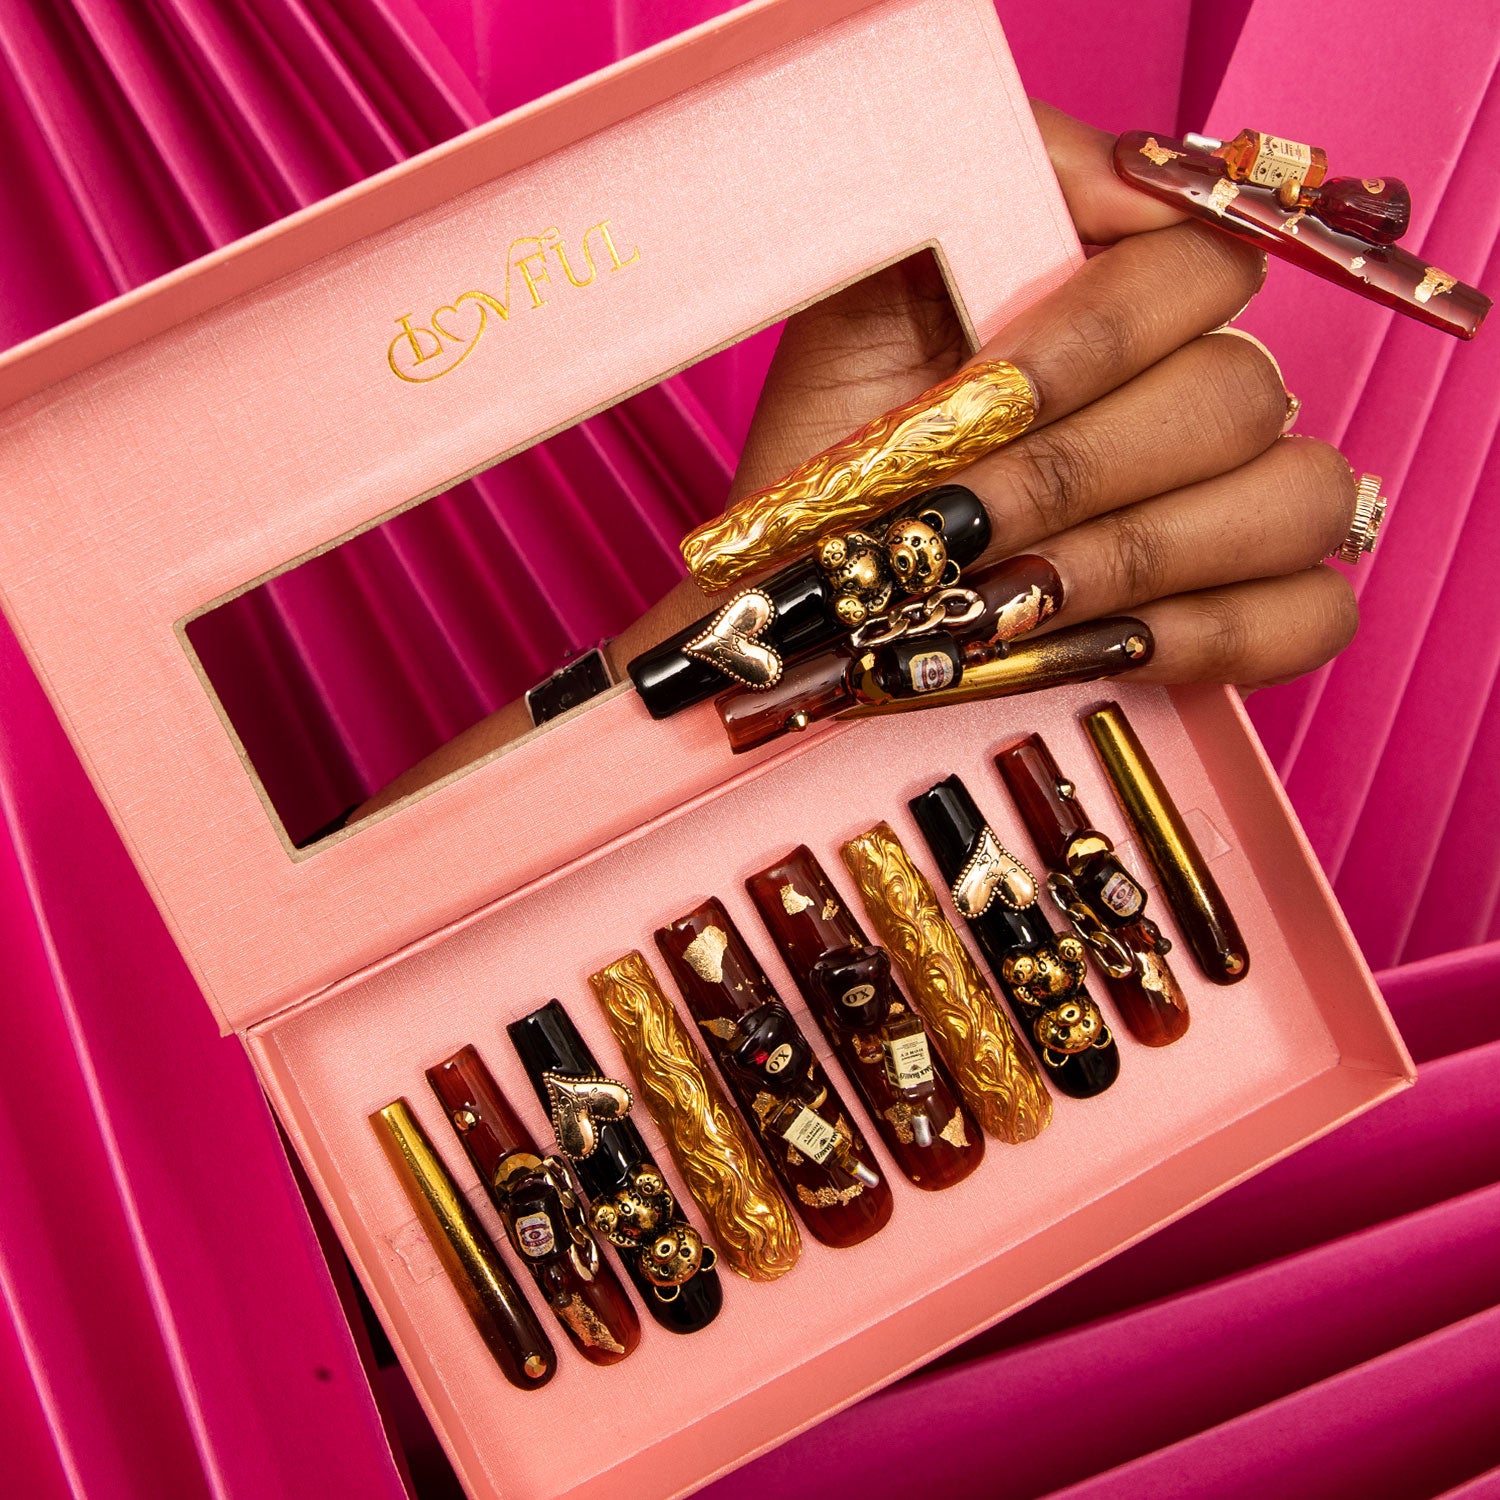 Hand showcasing 'Casino Party' press-on nails with black and gold designs, adorned with bear, heart-shaped gems, and a wine bottle charm, in a pink box with Lovful logo against a pink pleated fabric background.